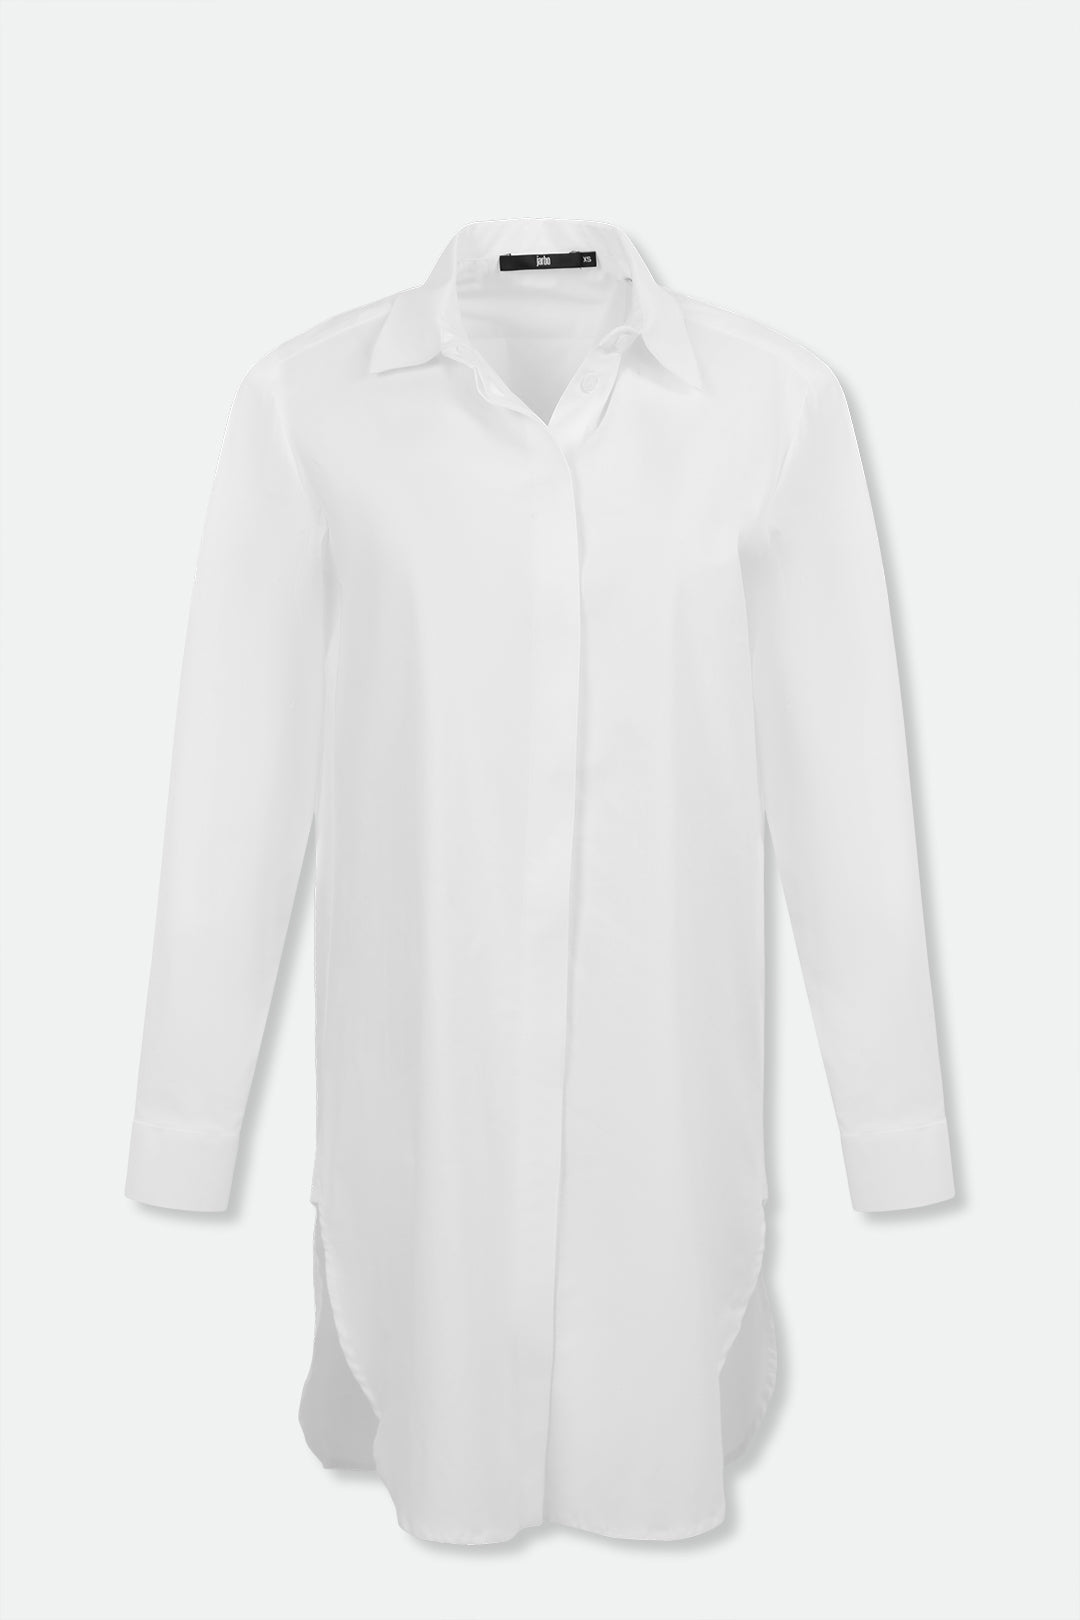 THE PERFECT SHIRT LENGTHENED IN ITALIAN COTTON STRETCH - Jarbo